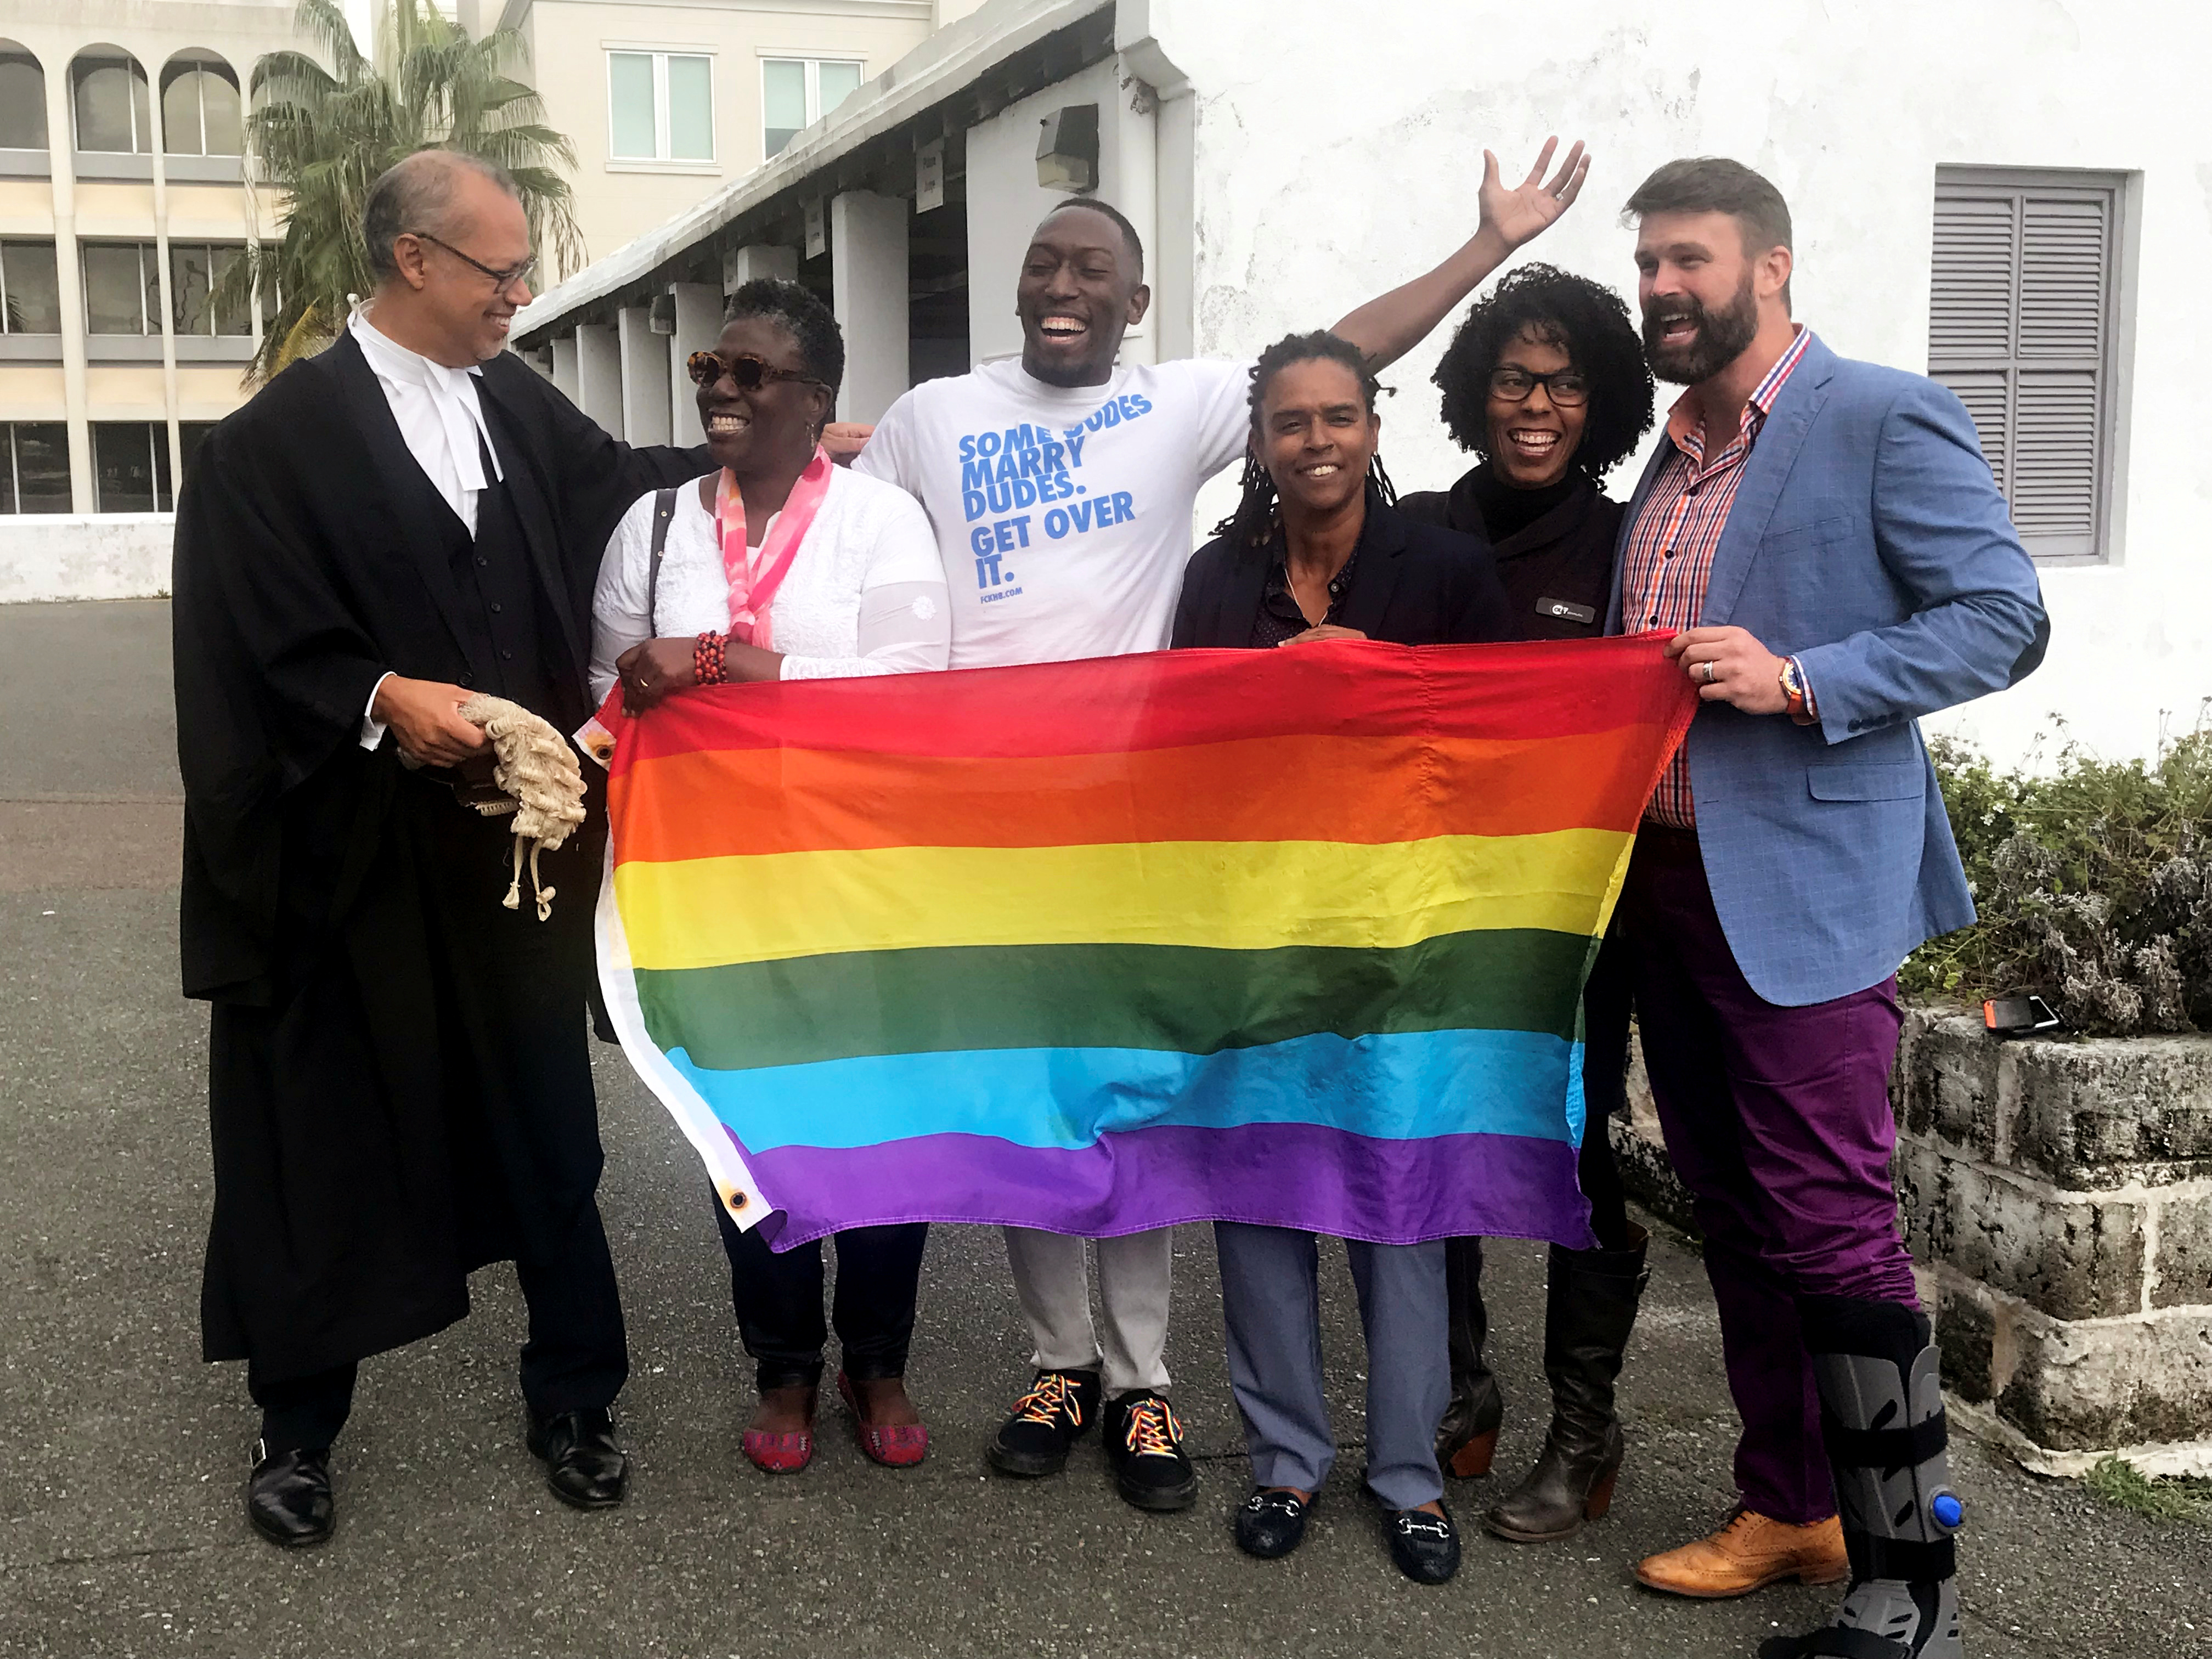 Rod Attride-Stirling, a lawyer who successfully challenged legislation banning gay marriage, poses for a photograph with gay rights supporters in front of court after the hearing, in Hamilton